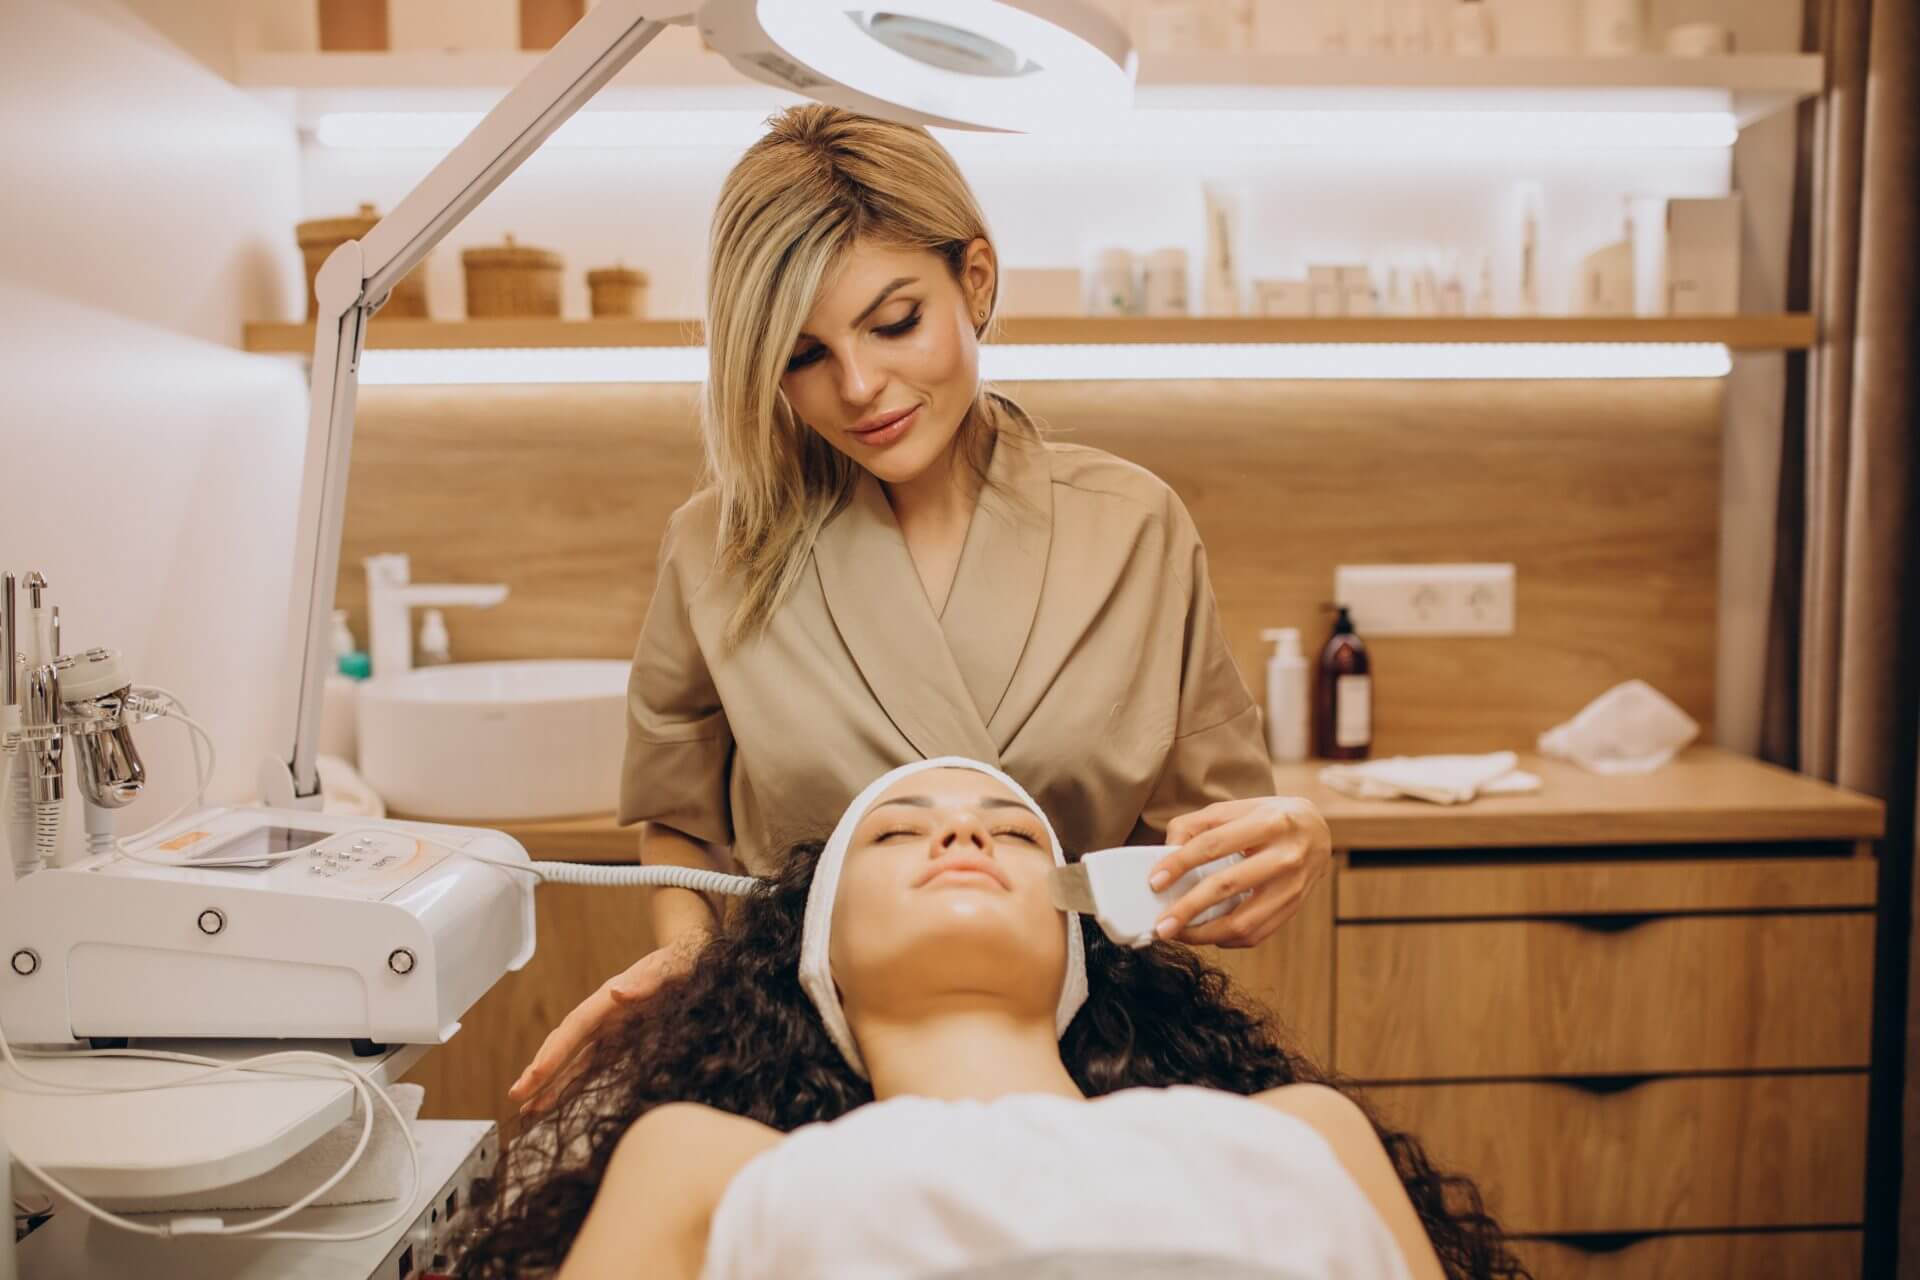 Woman cosmetologist conducting a beauty procedure on young woman